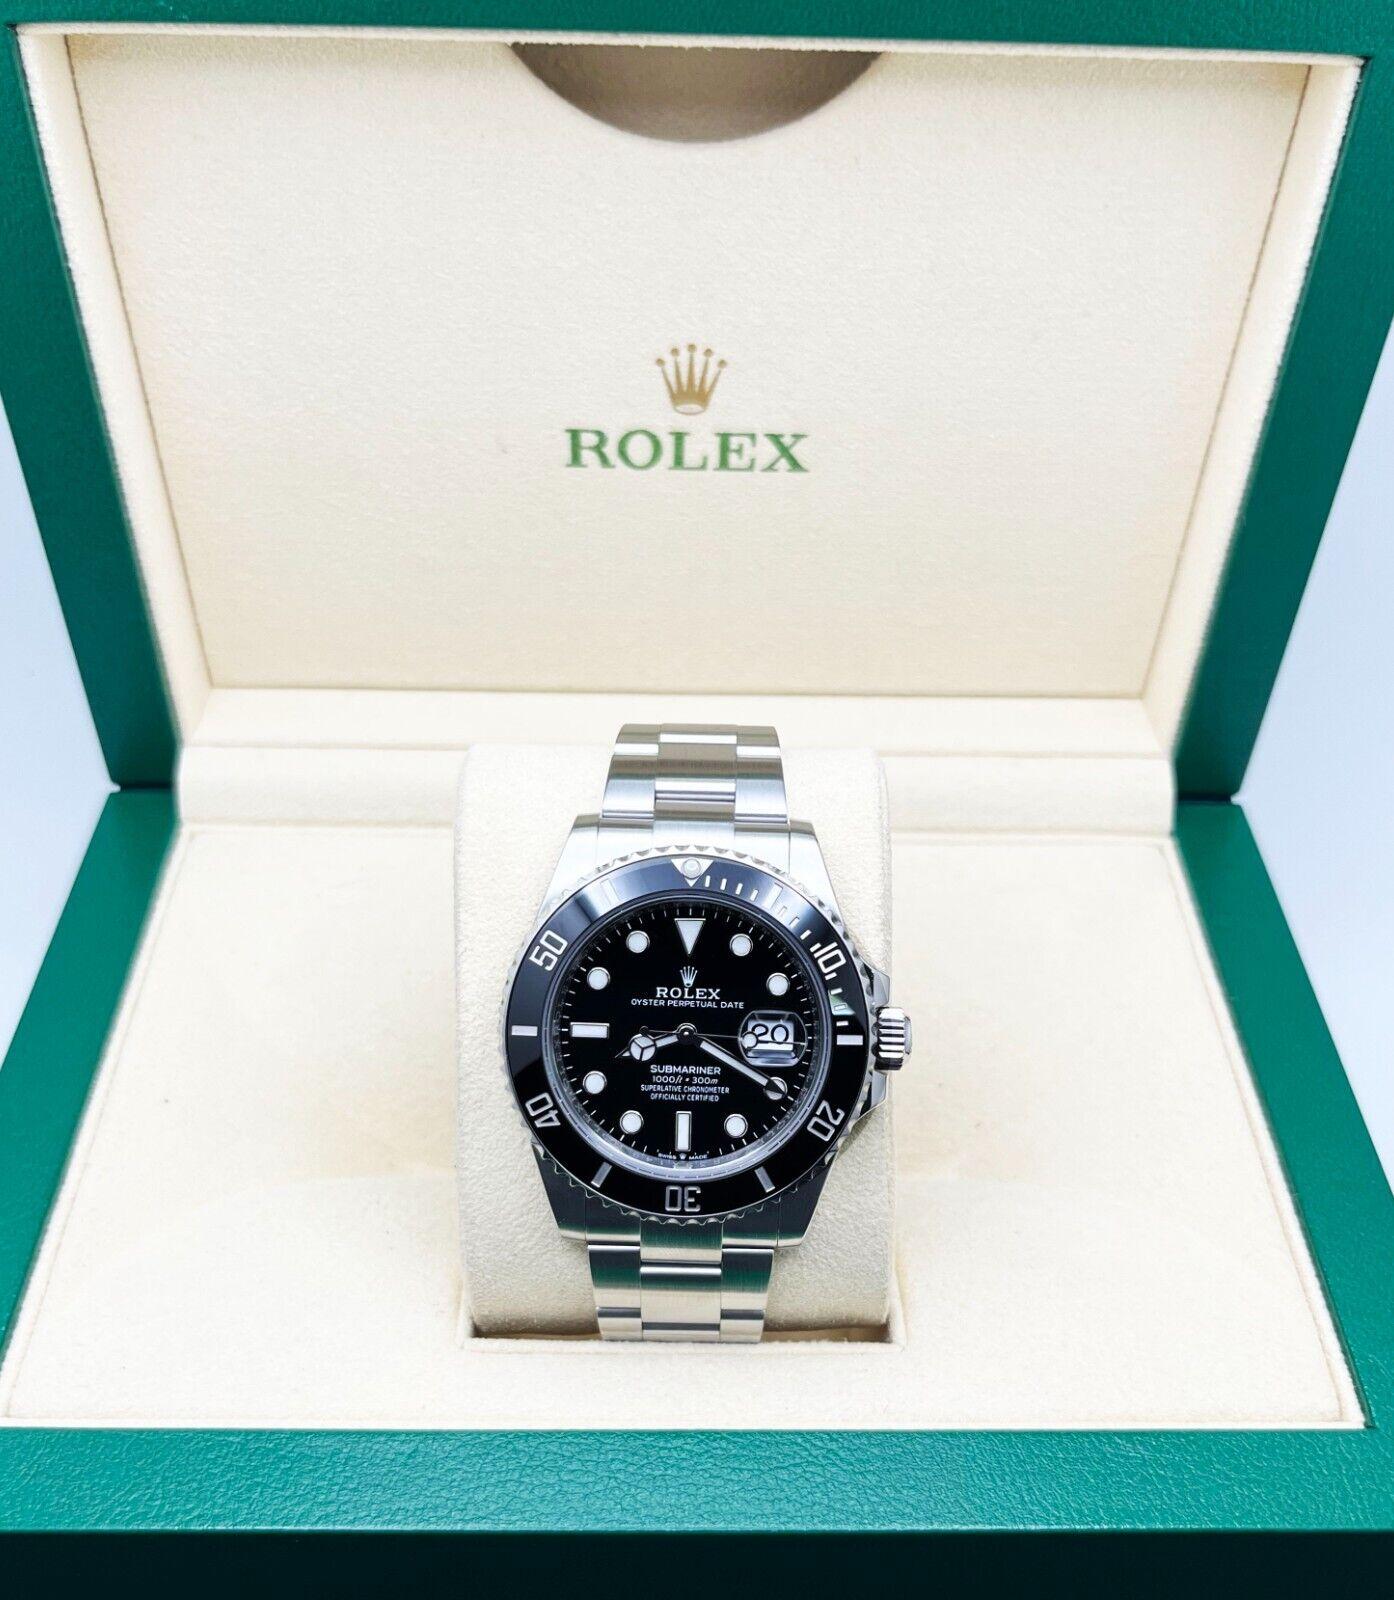 Rolex Submariner 126610 41mm Black Dial Stainless Steel Box Papers 2021 In Excellent Condition For Sale In San Diego, CA